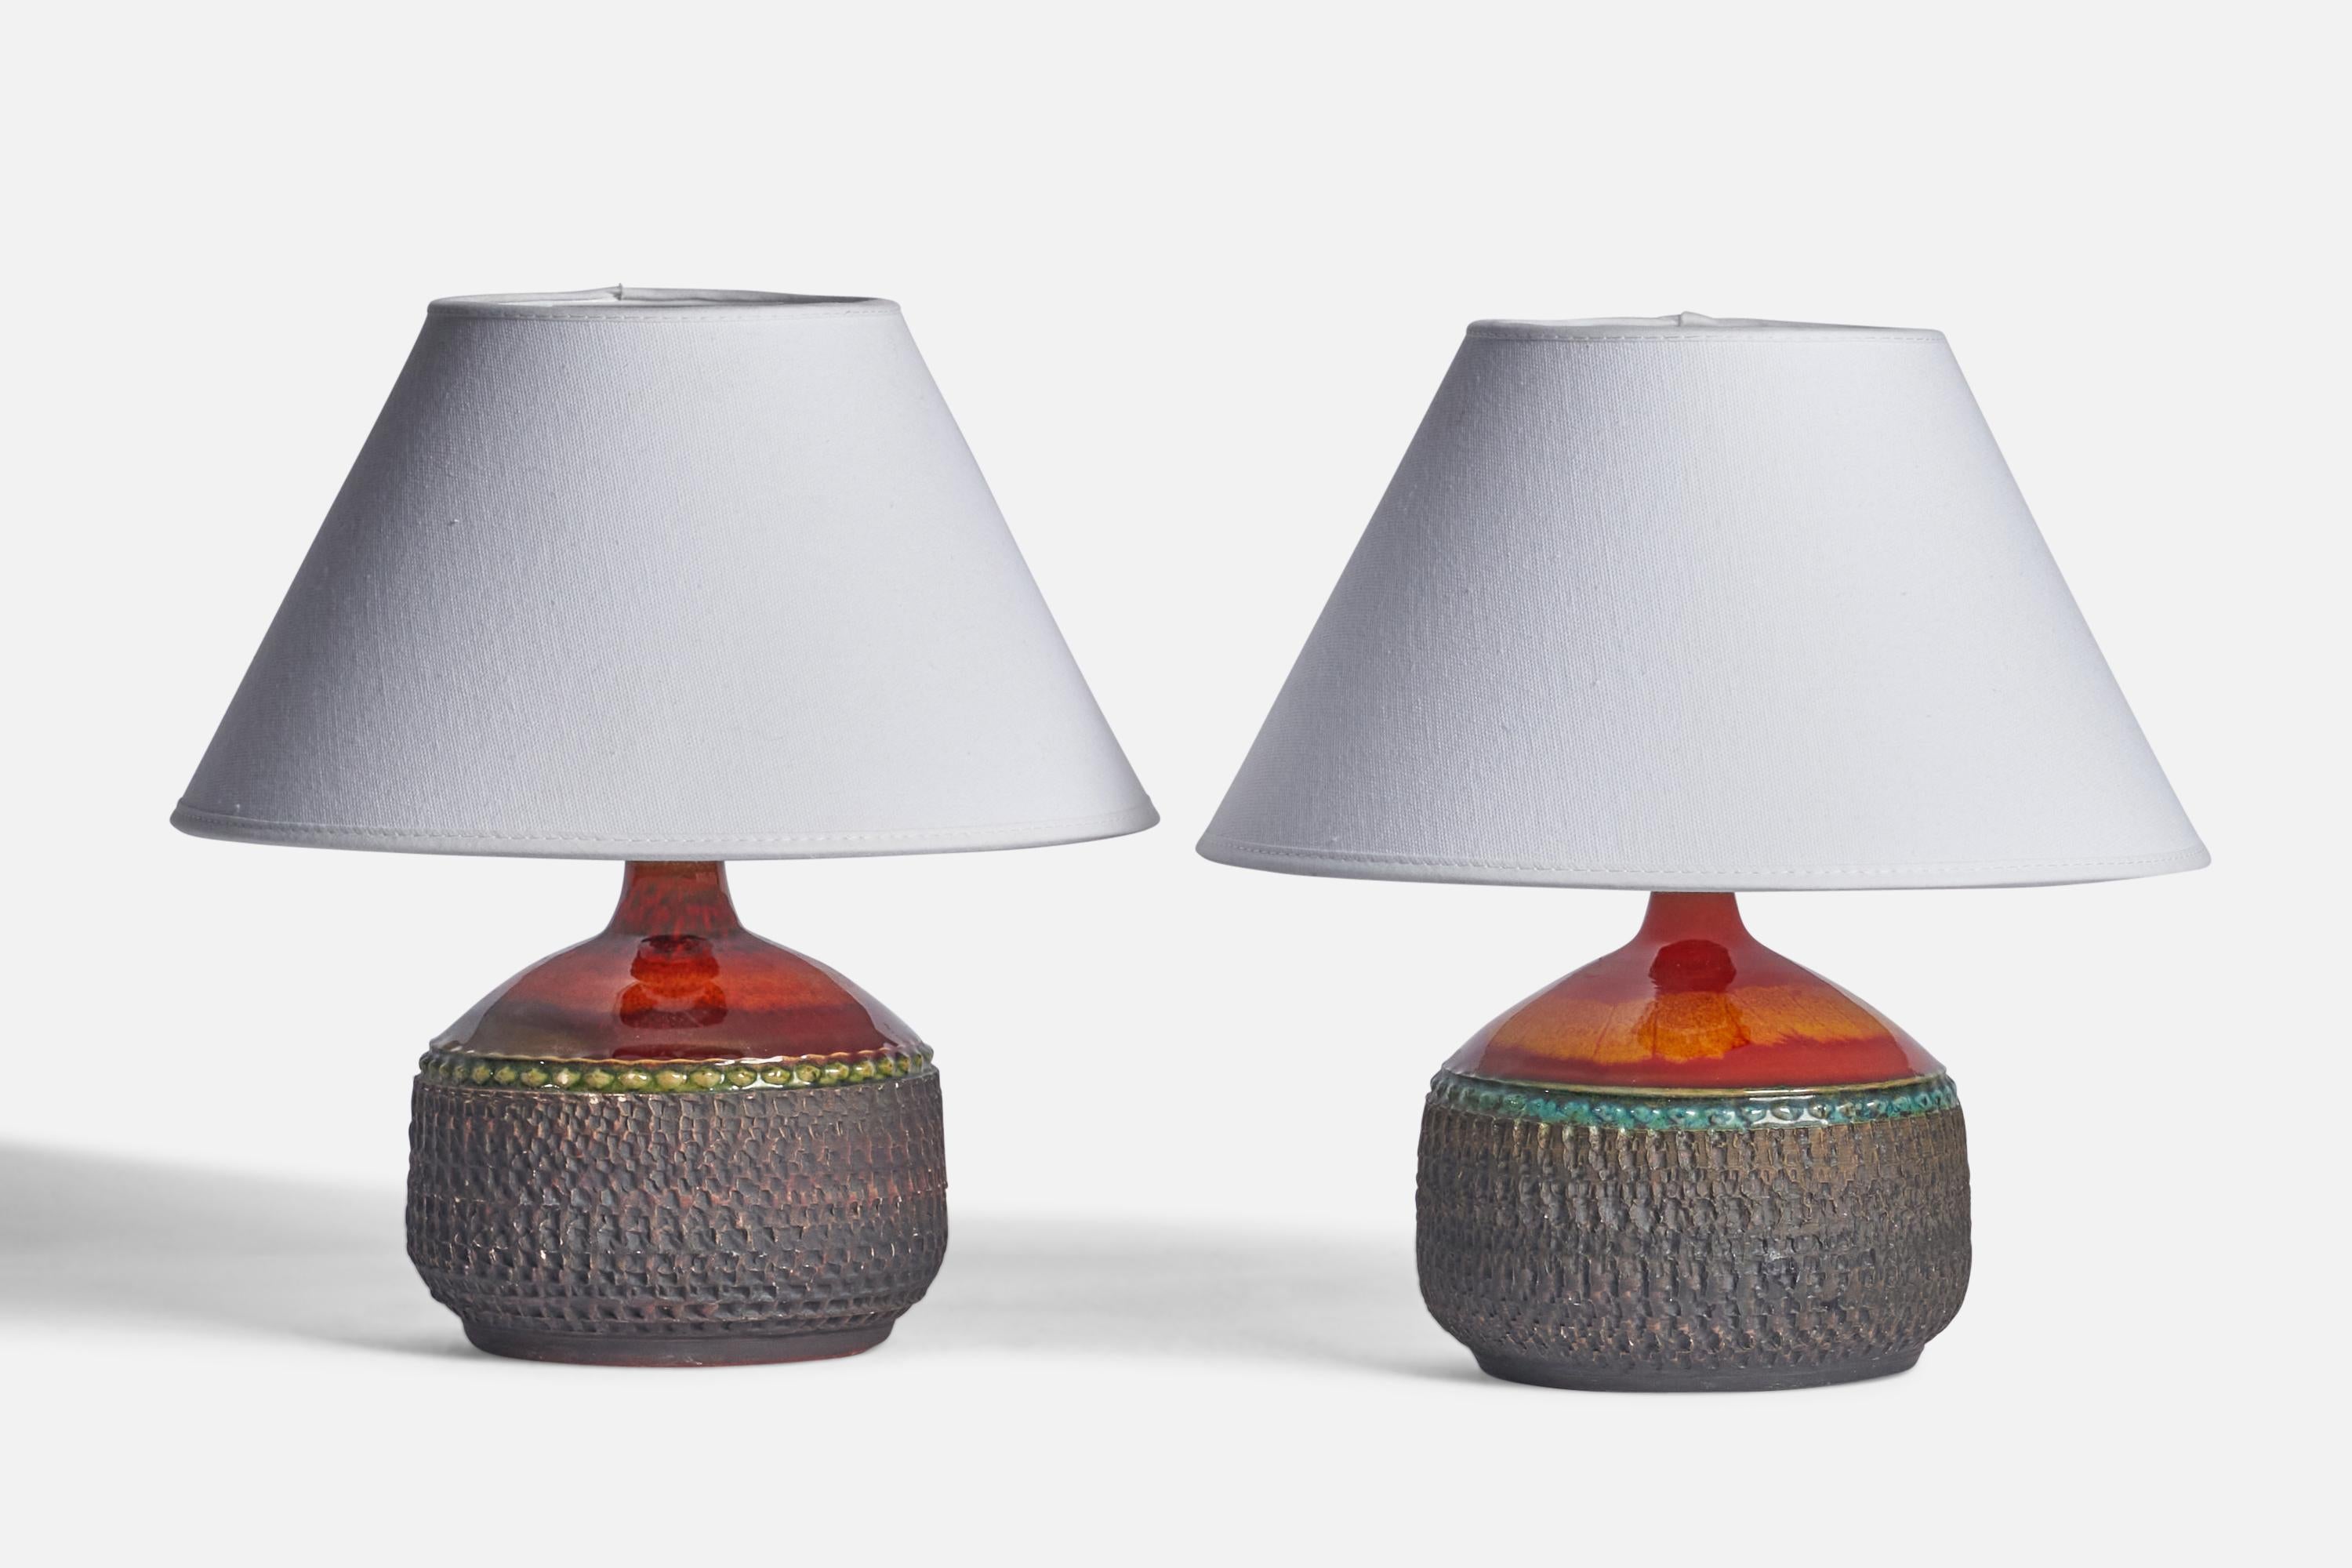 A pair of green, orange, red and grey-glazed table lamps designed and produced by Klase Höganäs, Sweden, 1960s.

Dimensions of Lamp (inches): 7.25” H x 5.25” Diameter
Dimensions of Shade (inches): 4.5” Top Diameter x 10” Bottom Diameter x